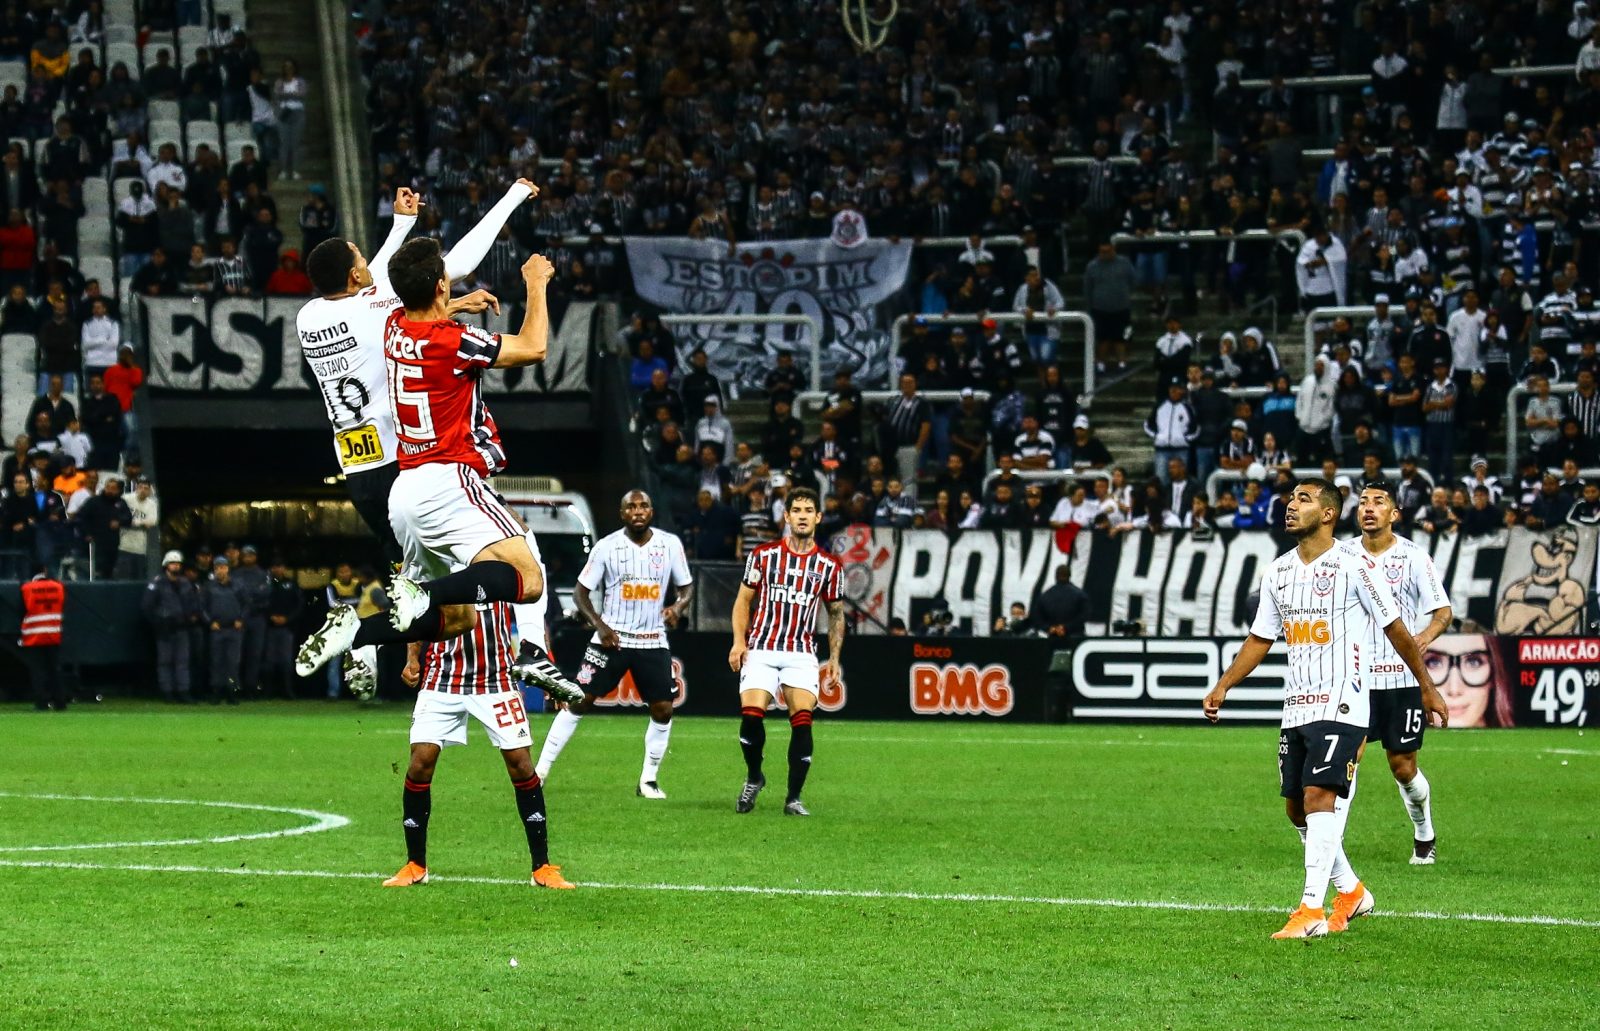 Corinthians wins São Paulo in the rematch after the end of the State Championship